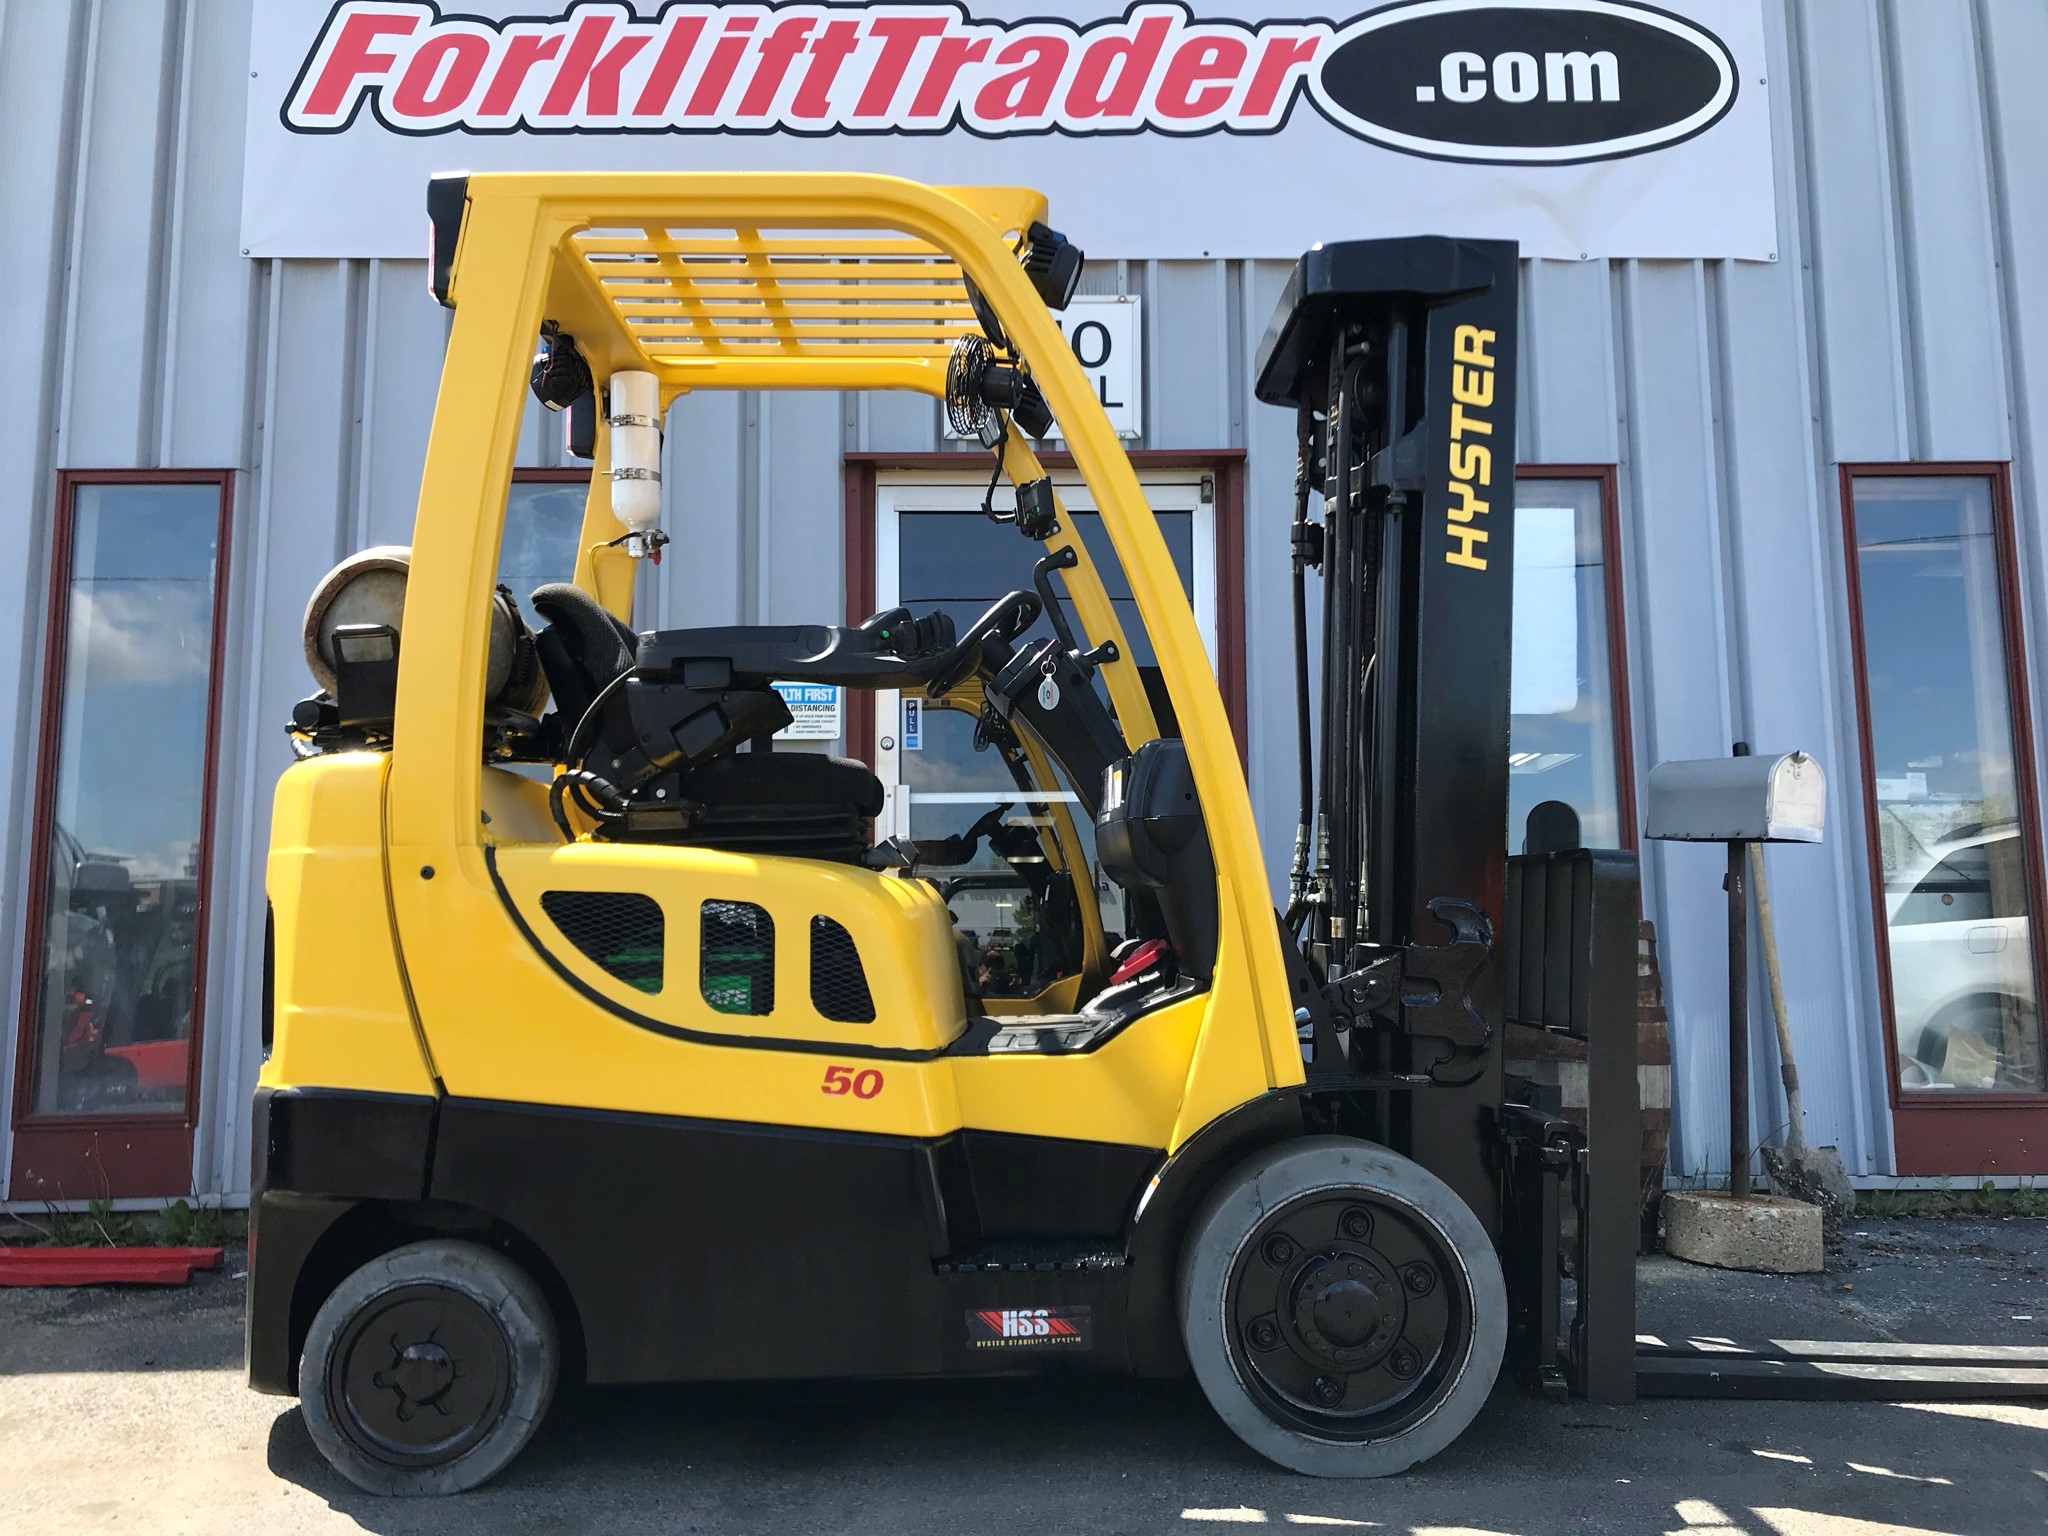 189" lift height 2016 hyster forklift for sale